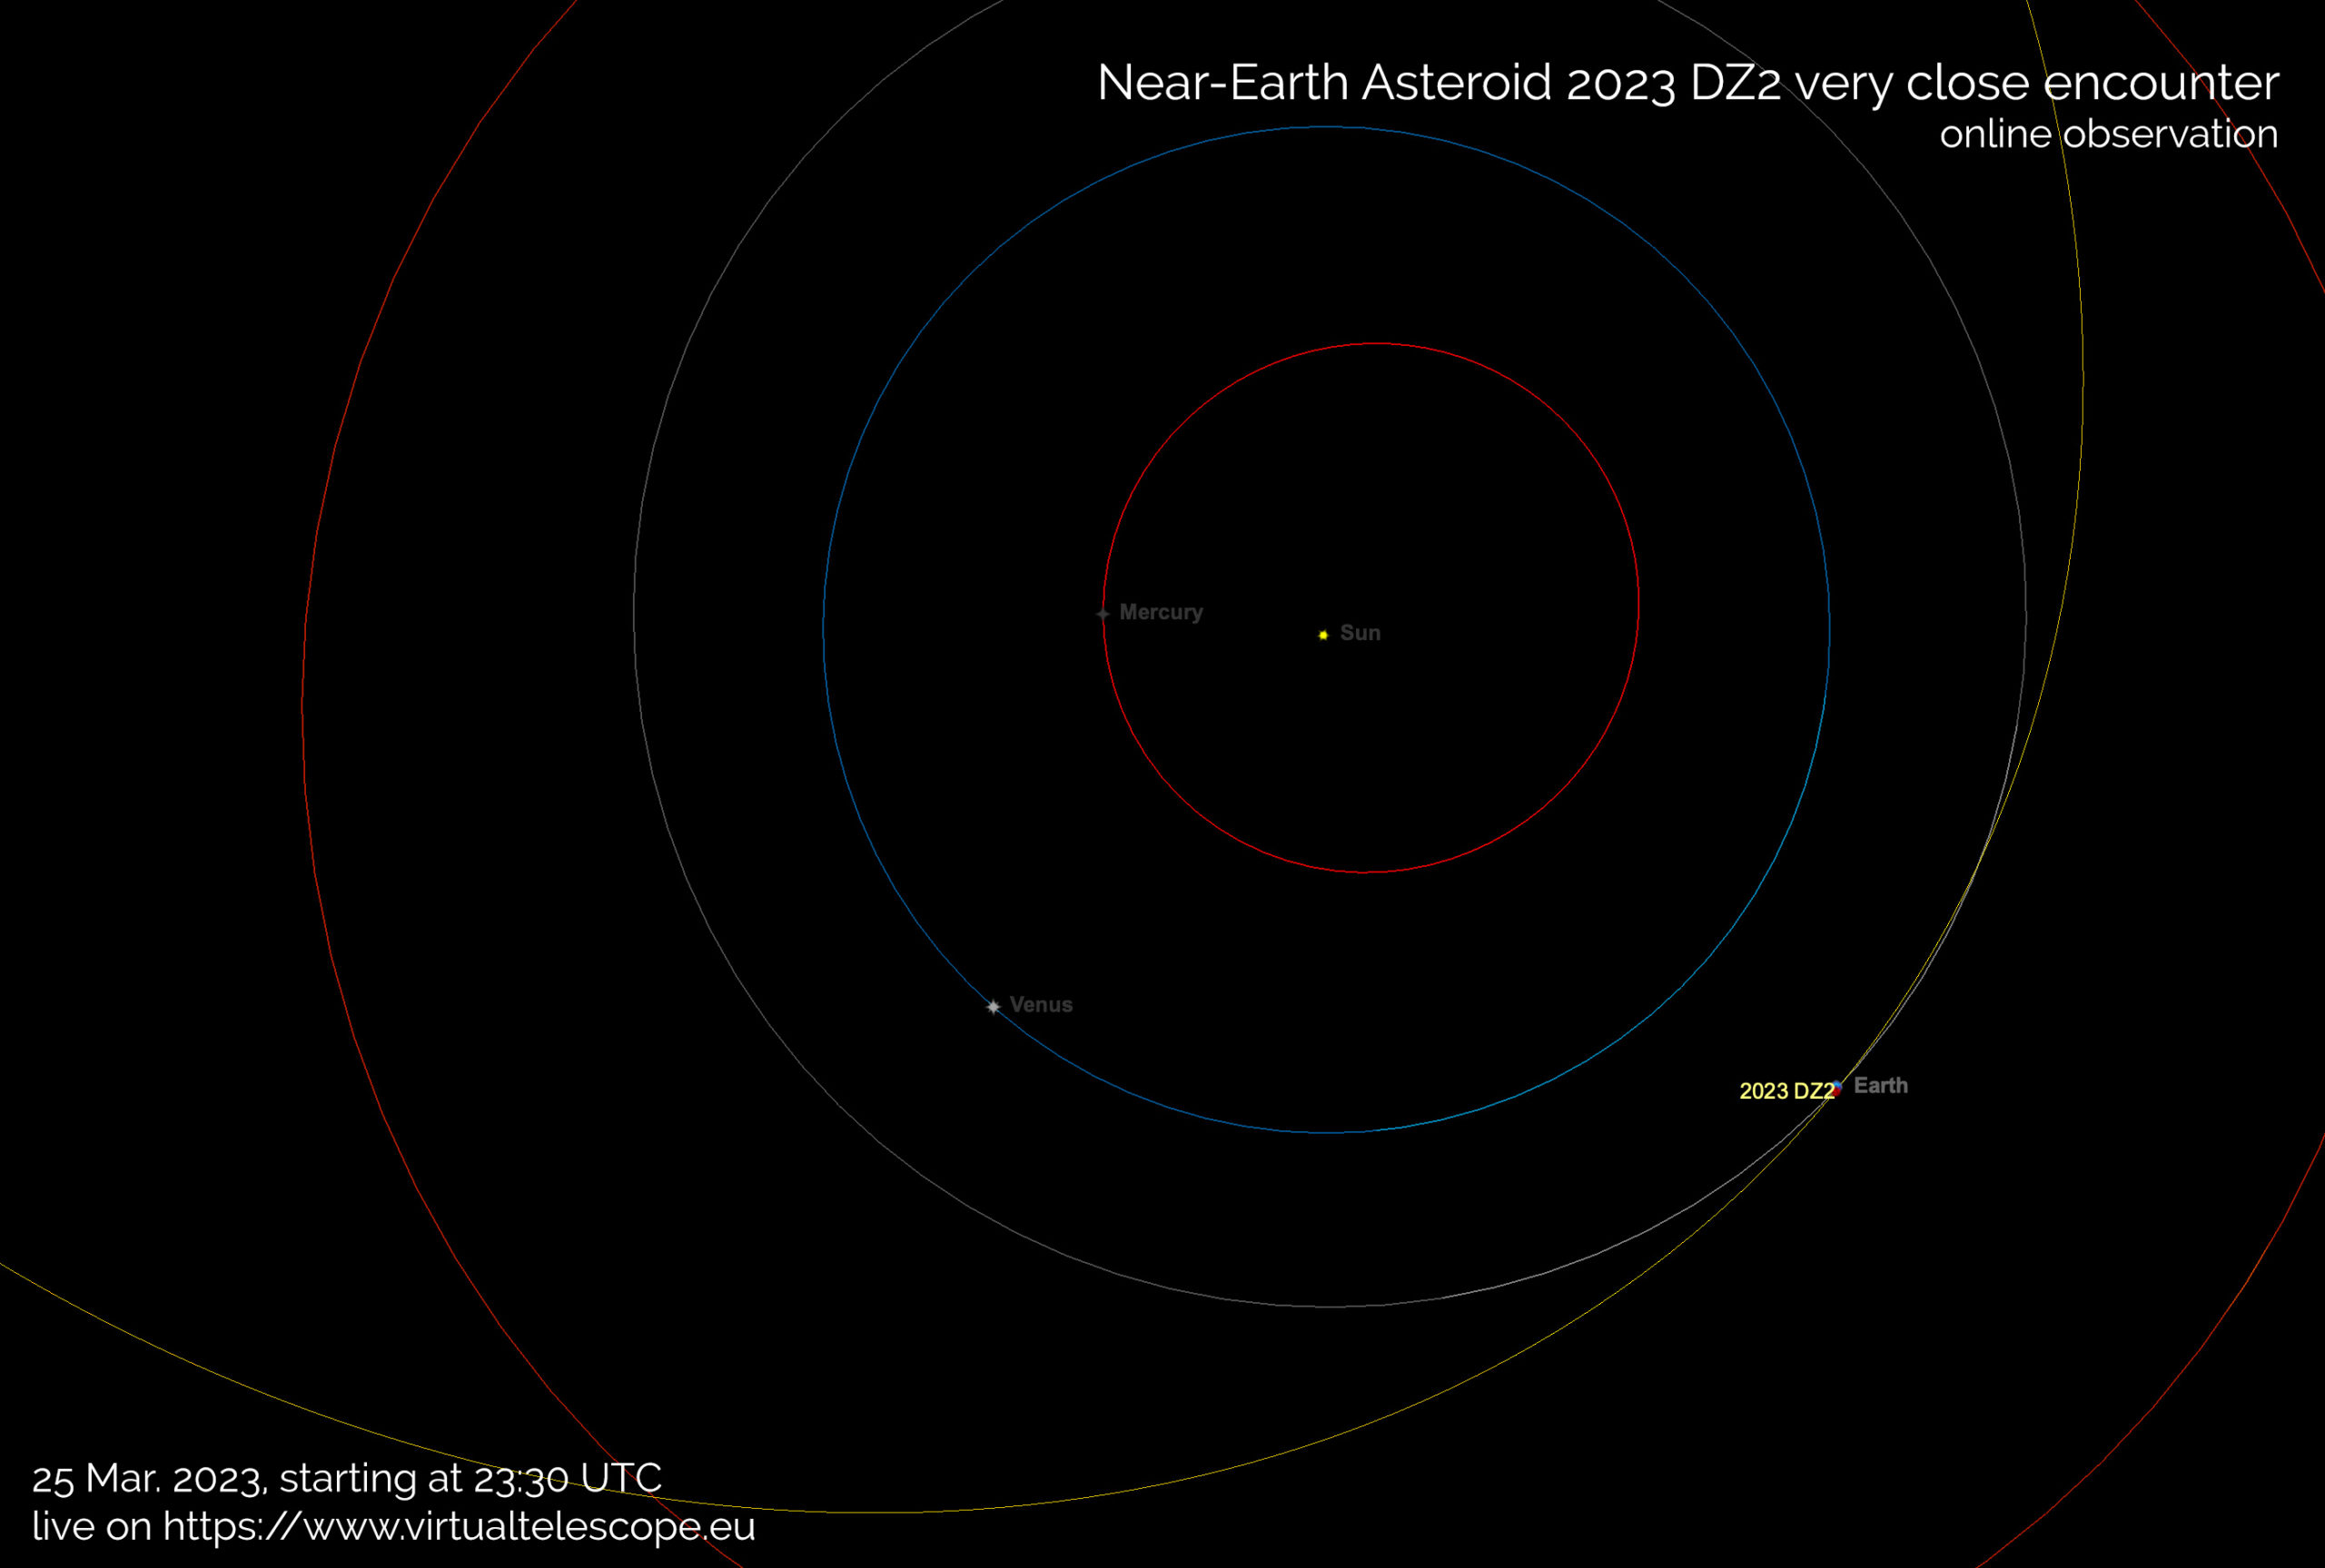 Near-Earth asteroid 2023 DZ2: poster of the event.